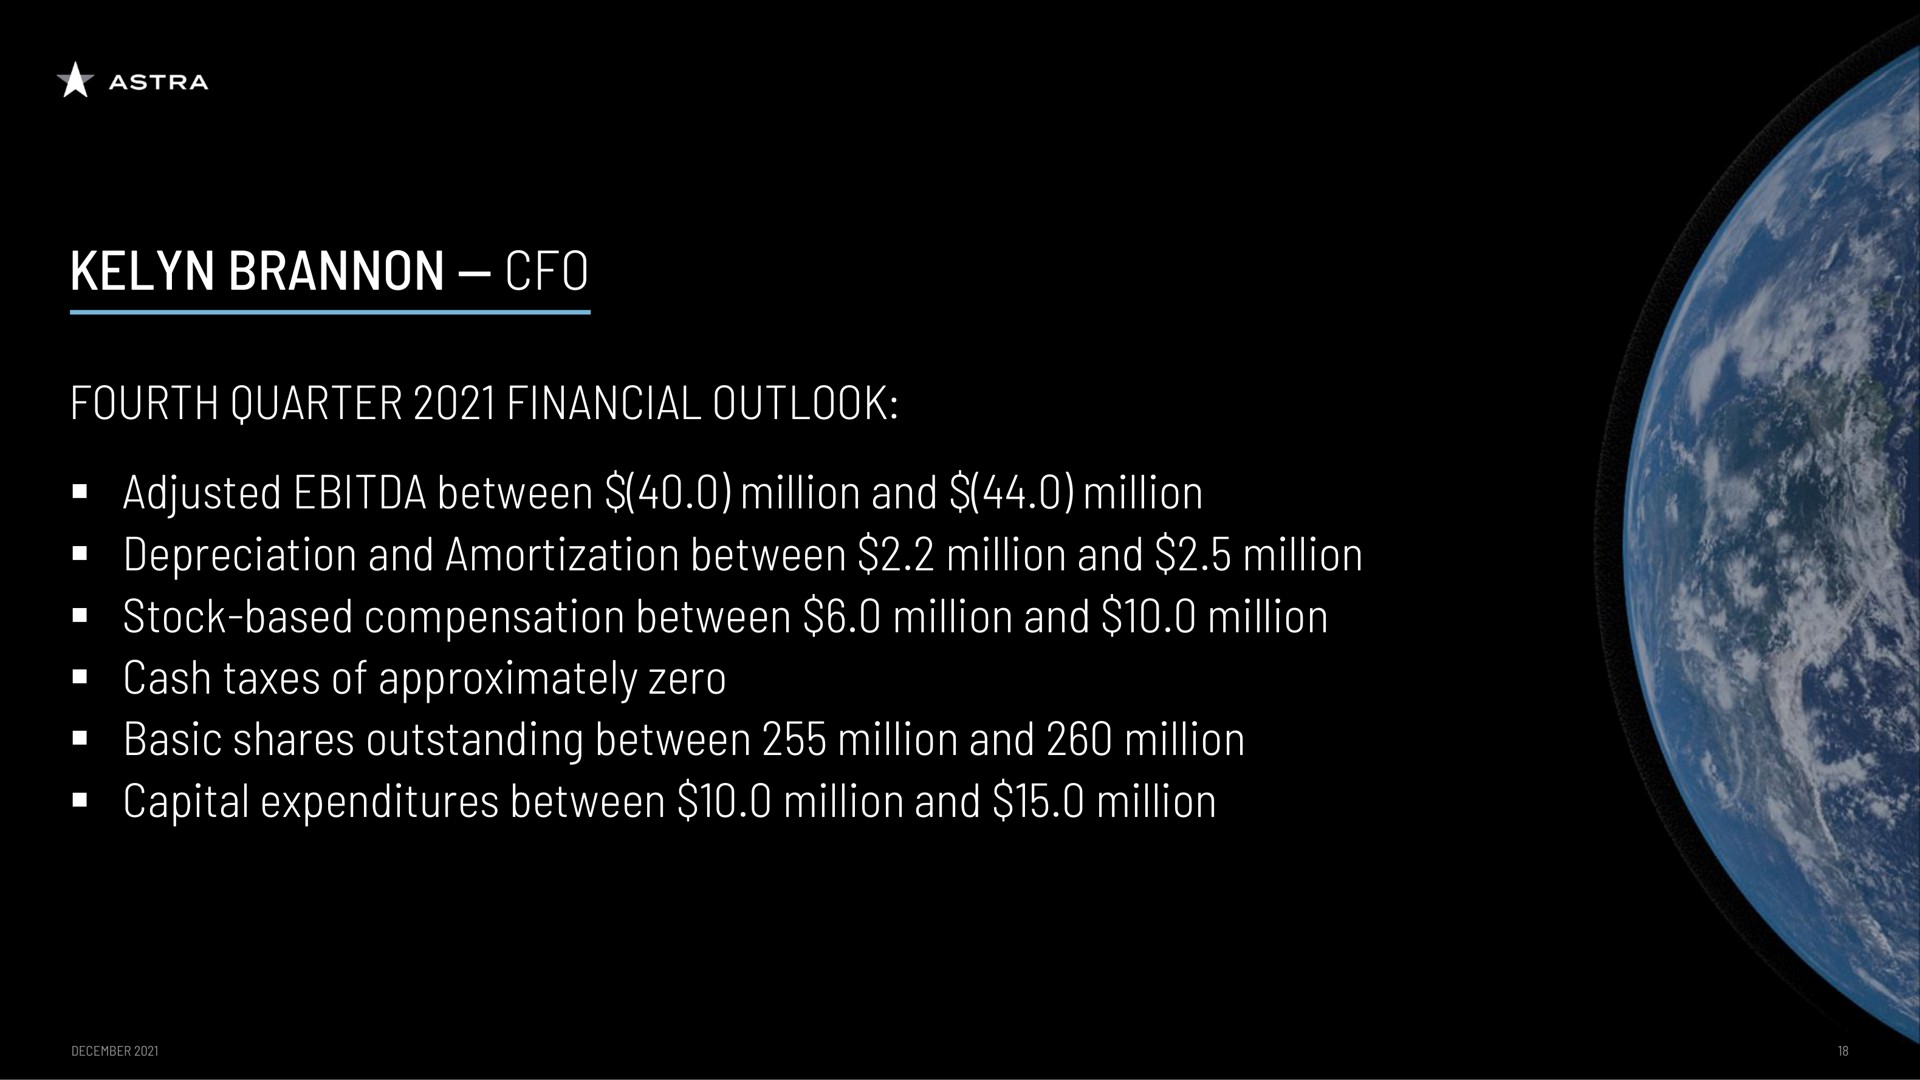 fourth quarter financial outlook adjusted between million and million depreciation and amortization between million and million stock based compensation between million and million cash taxes of approximately zero basic shares outstanding between million and million capital expenditures between million and million | Astra